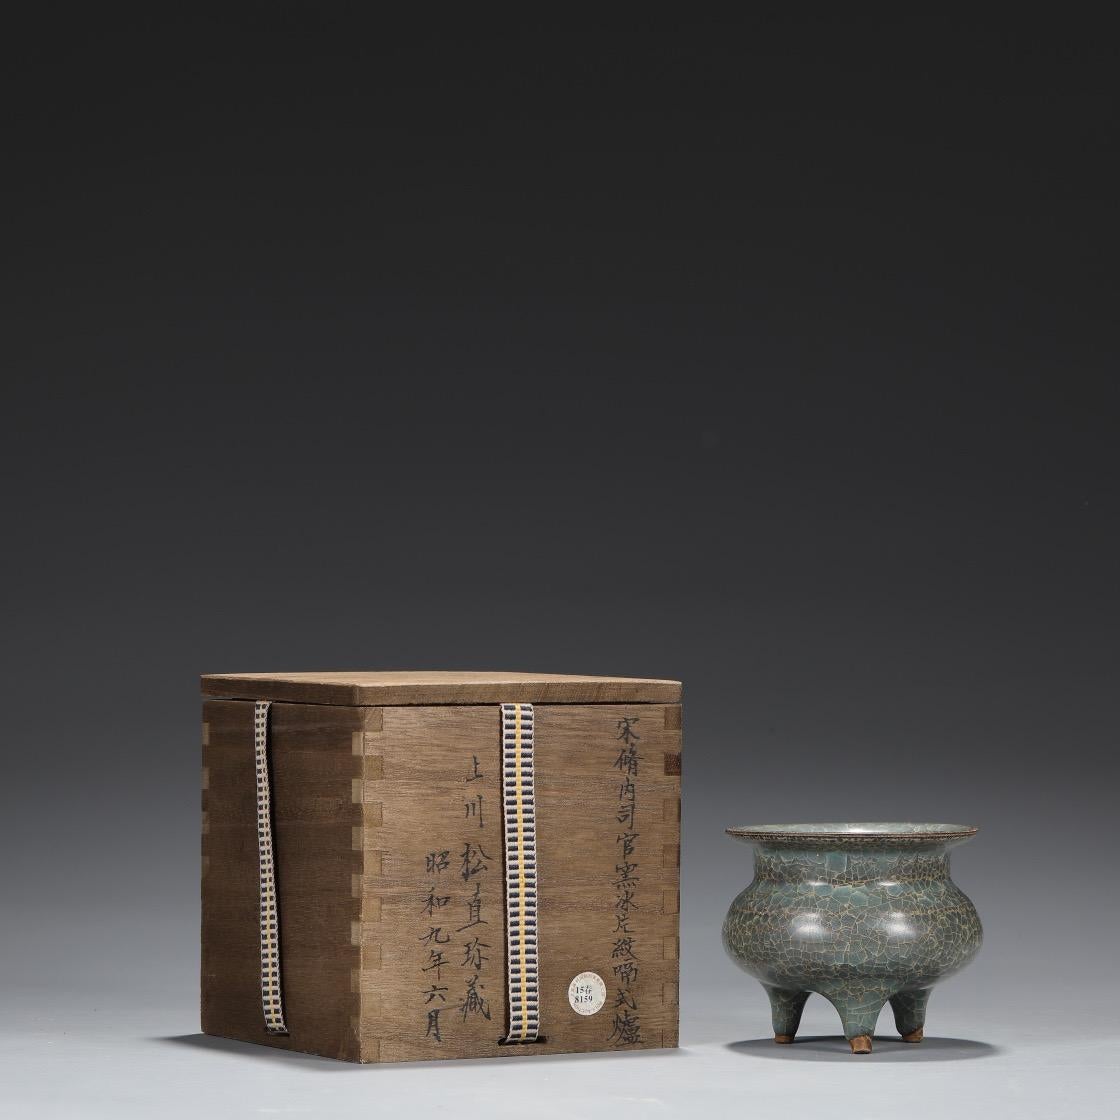 This old collection of Southern Song Dynasty Xiu Nei Si Official Kiln Ice Cracking Glaze Pattern Burner is very special with high craftsmanship. 

Kilns were essential for firing ceramics, and each kiln often developed its unique style and